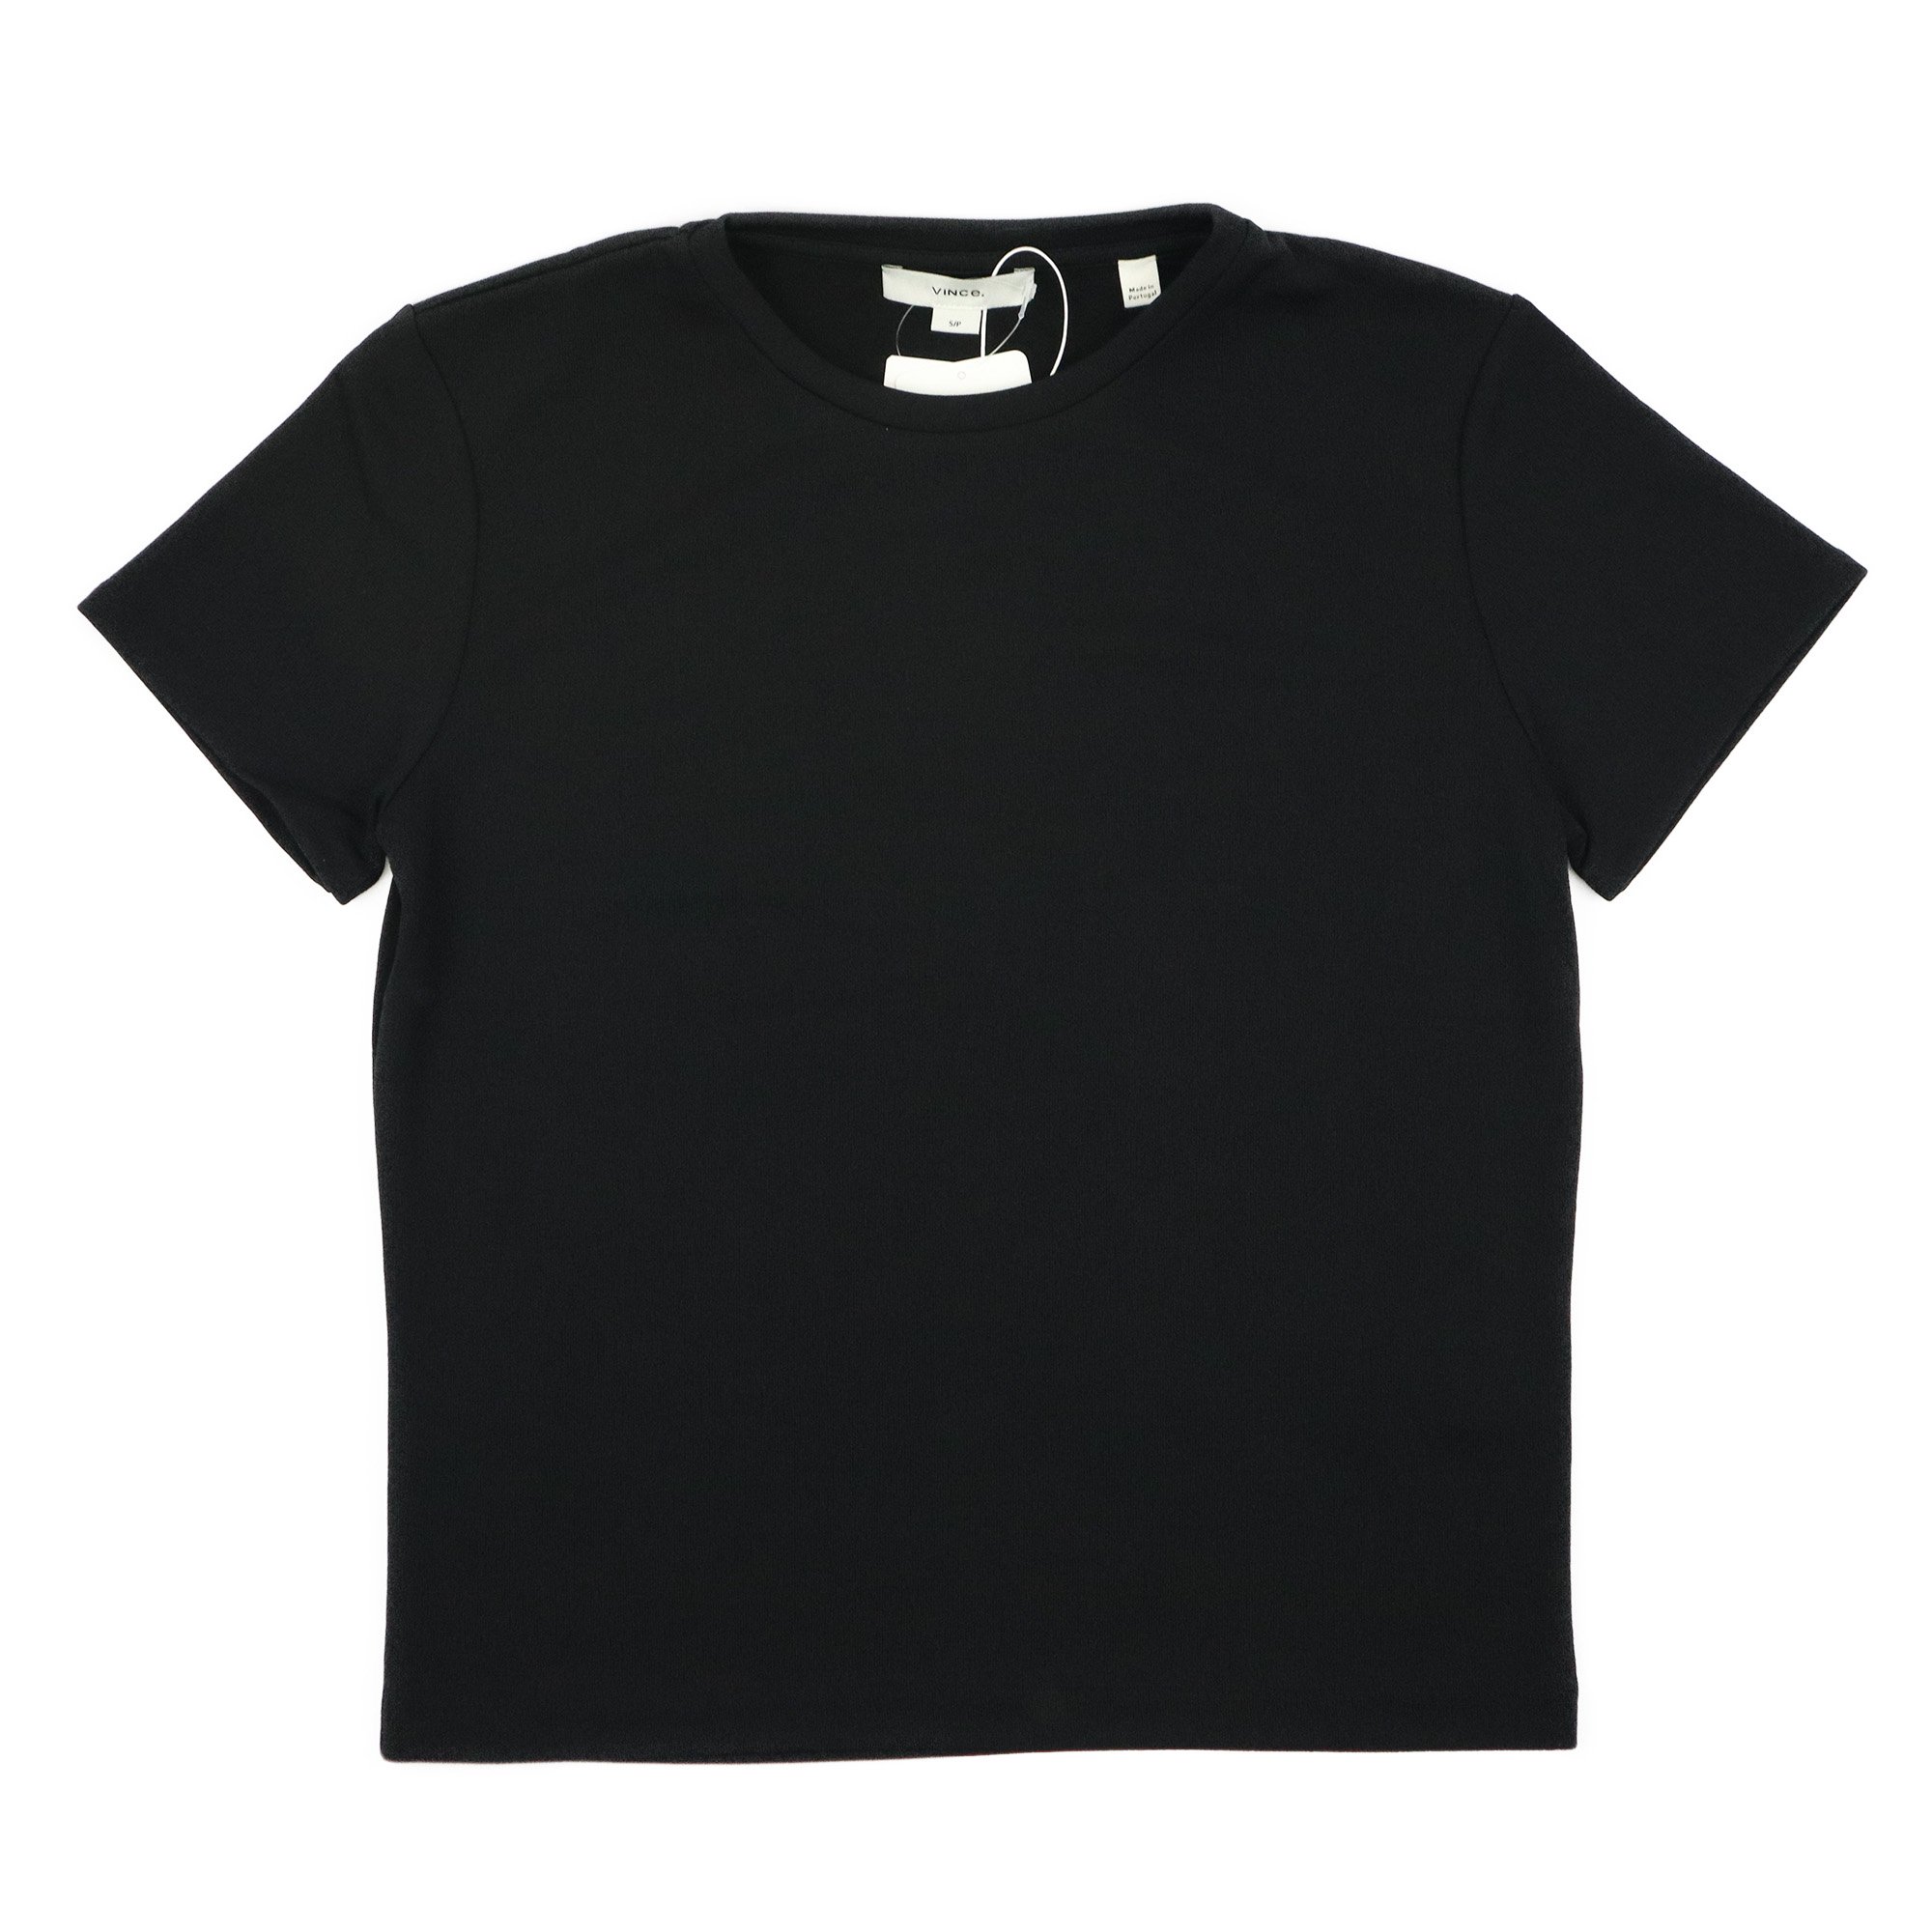 <img class='new_mark_img1' src='https://img.shop-pro.jp/img/new/icons47.gif' style='border:none;display:inline;margin:0px;padding:0px;width:auto;' />VINCE S/S KNIT TOPS BLACK